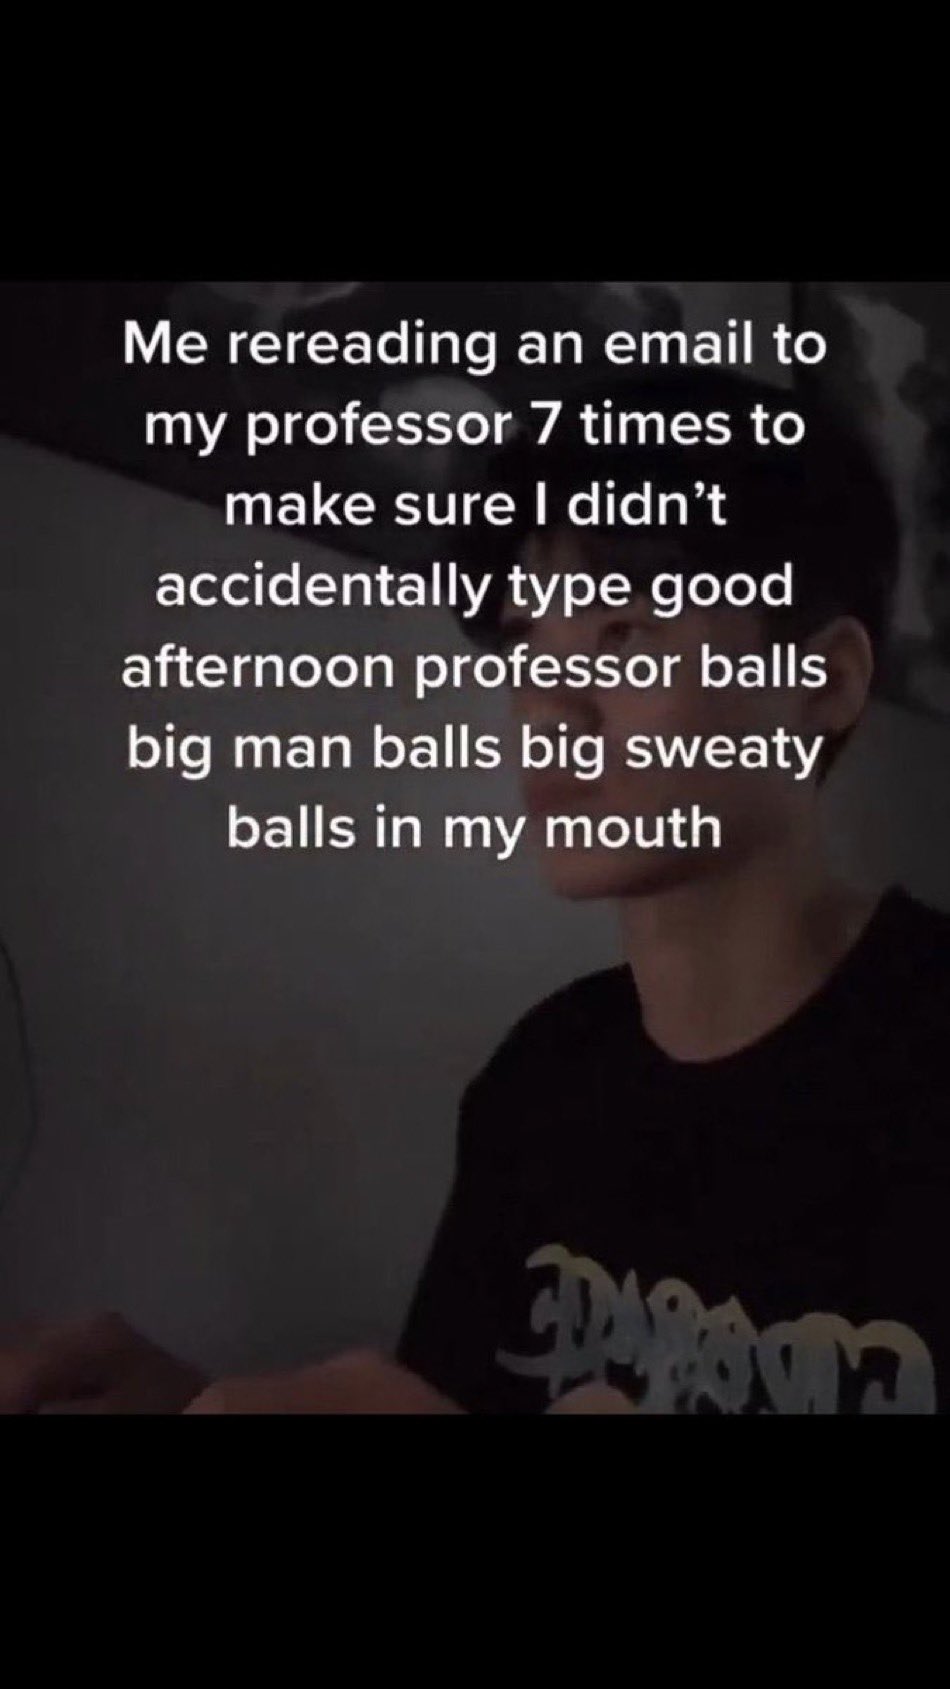 wild tiktok screenshots - - - Me rereading an email to my professor 7 times to make sure I didn't accidentally type good afternoon professor balls big man balls big sweaty balls in my mouth